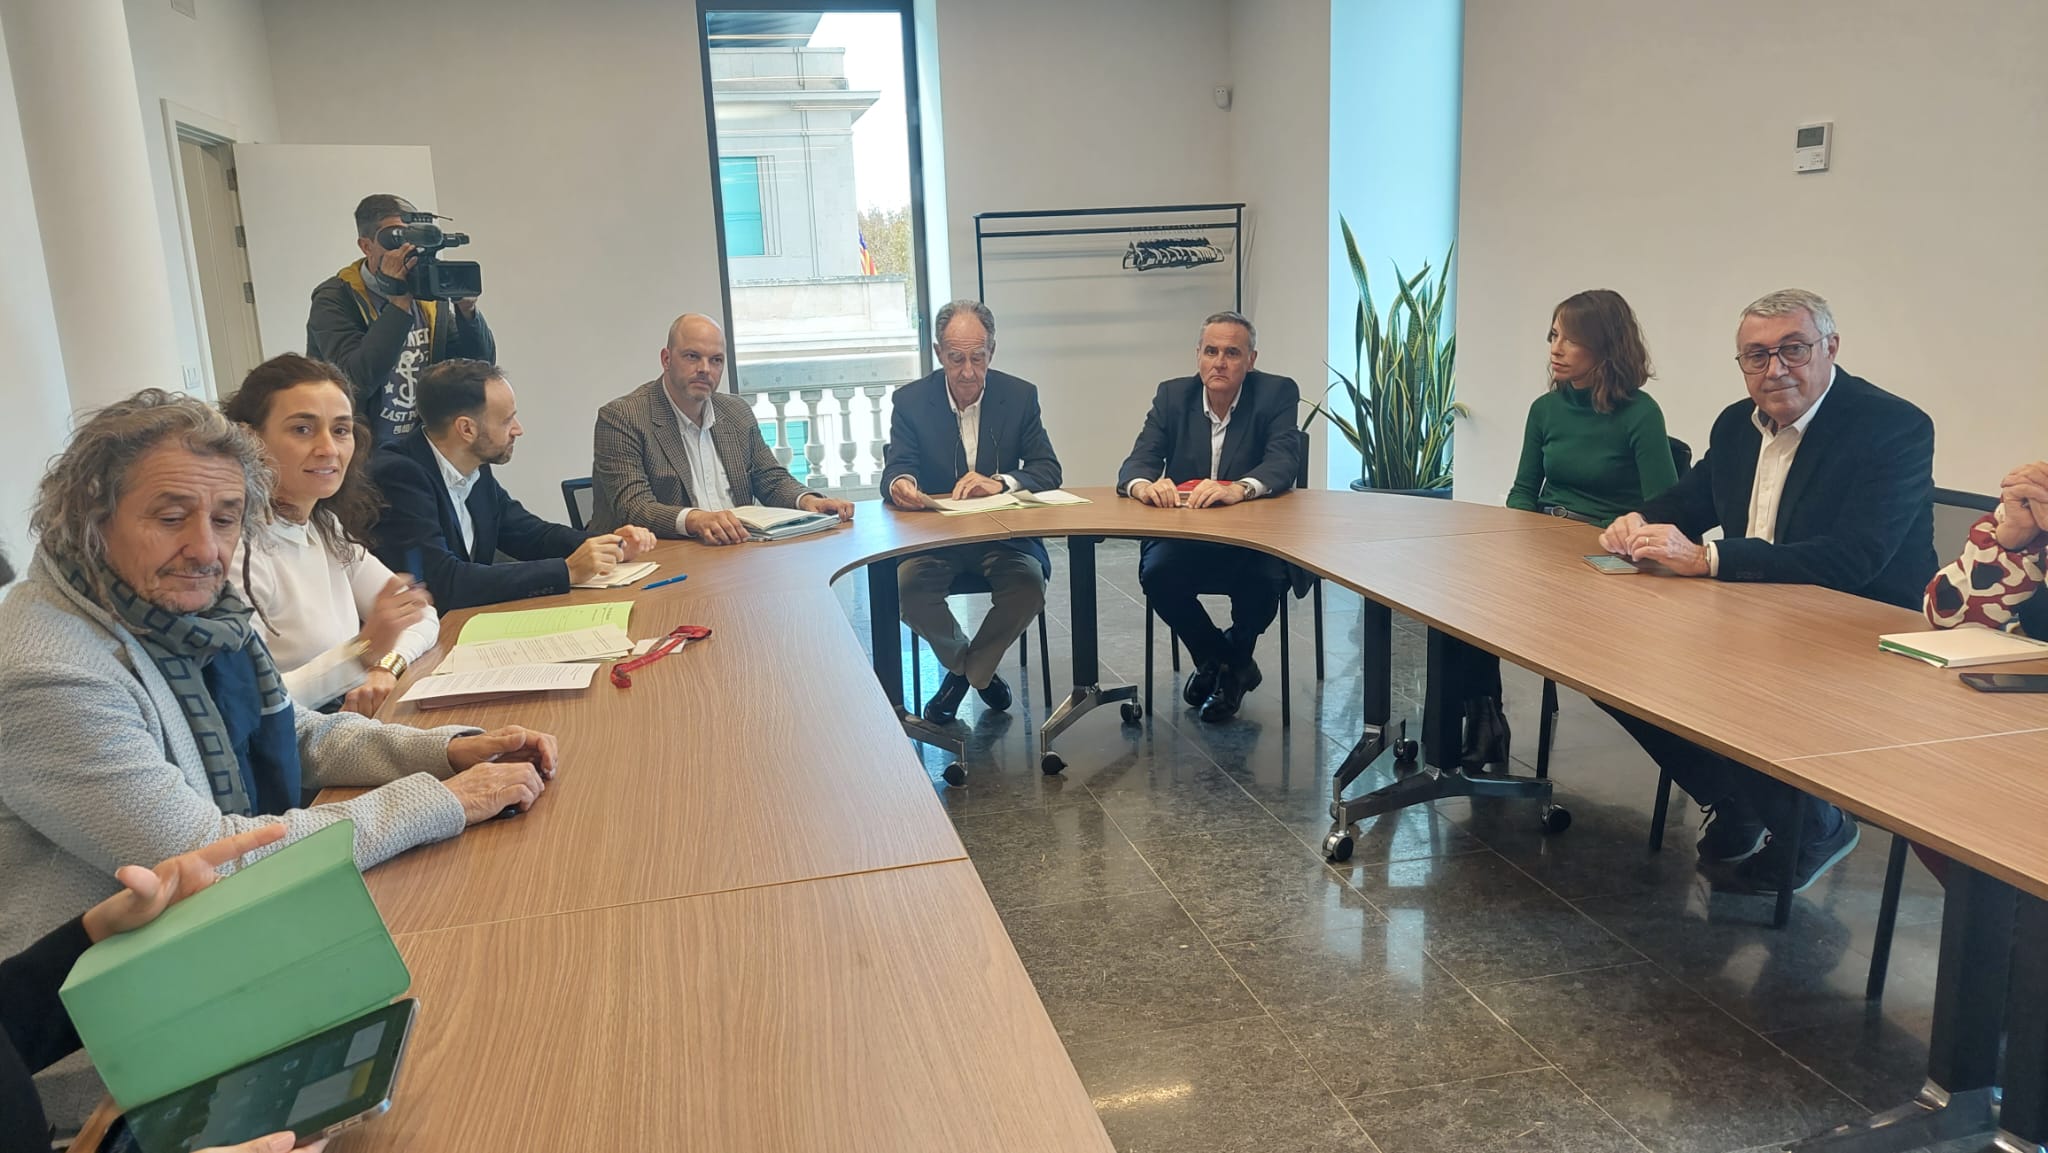 Agreement reached to reorganise construction work dates on Palma's seafront promenade to meet residents' and business owners' demands